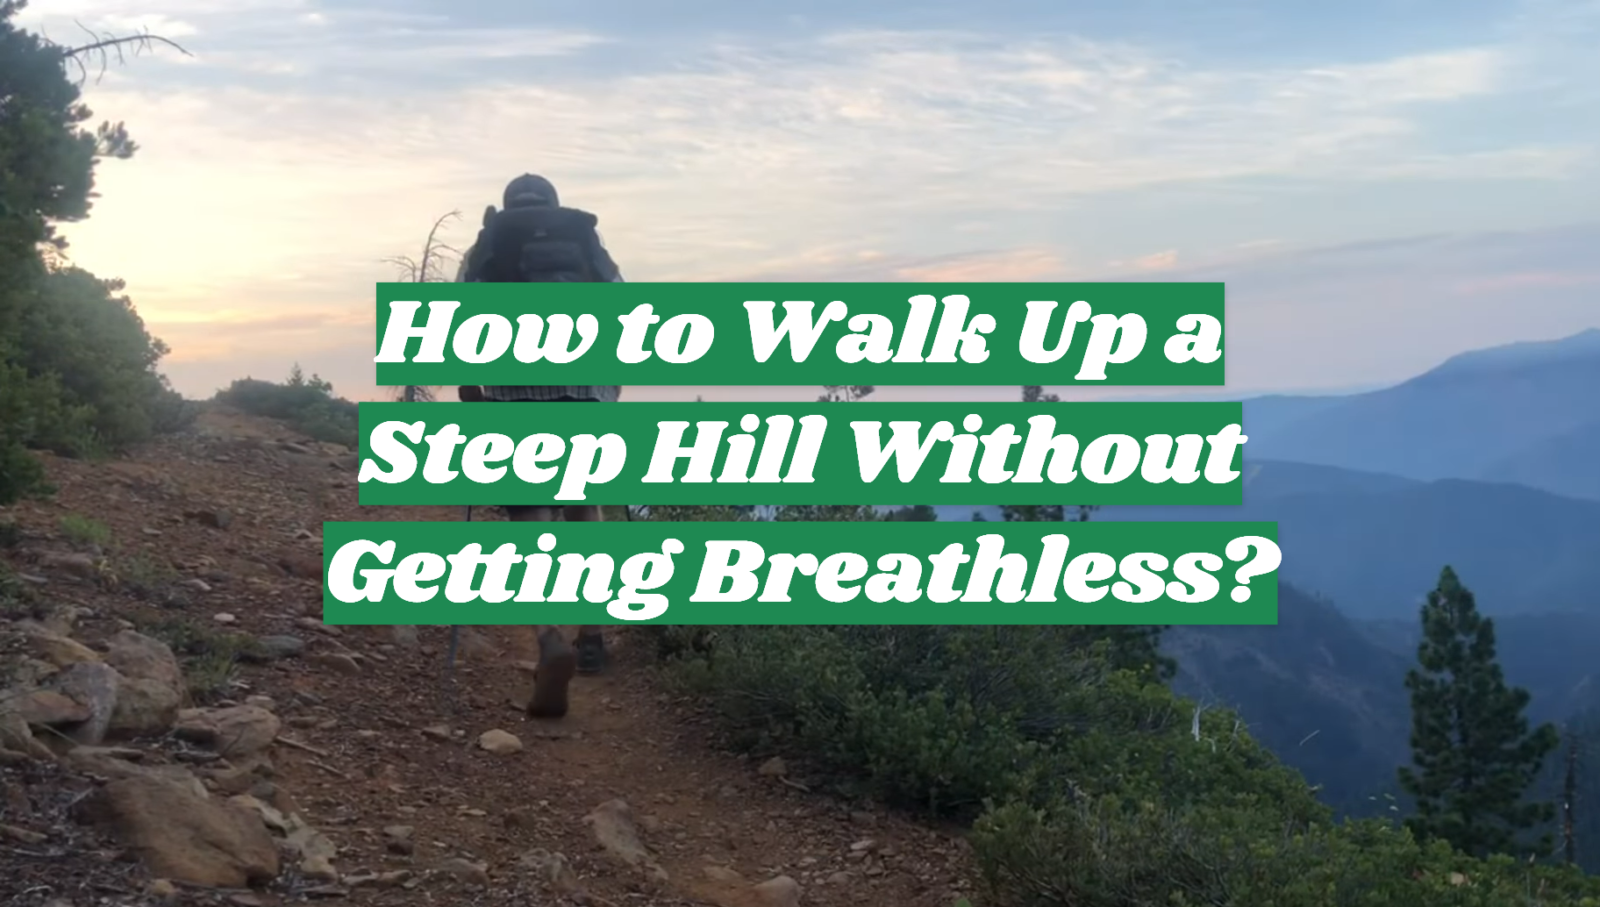 How to Walk Up a Steep Hill Without Getting Breathless?